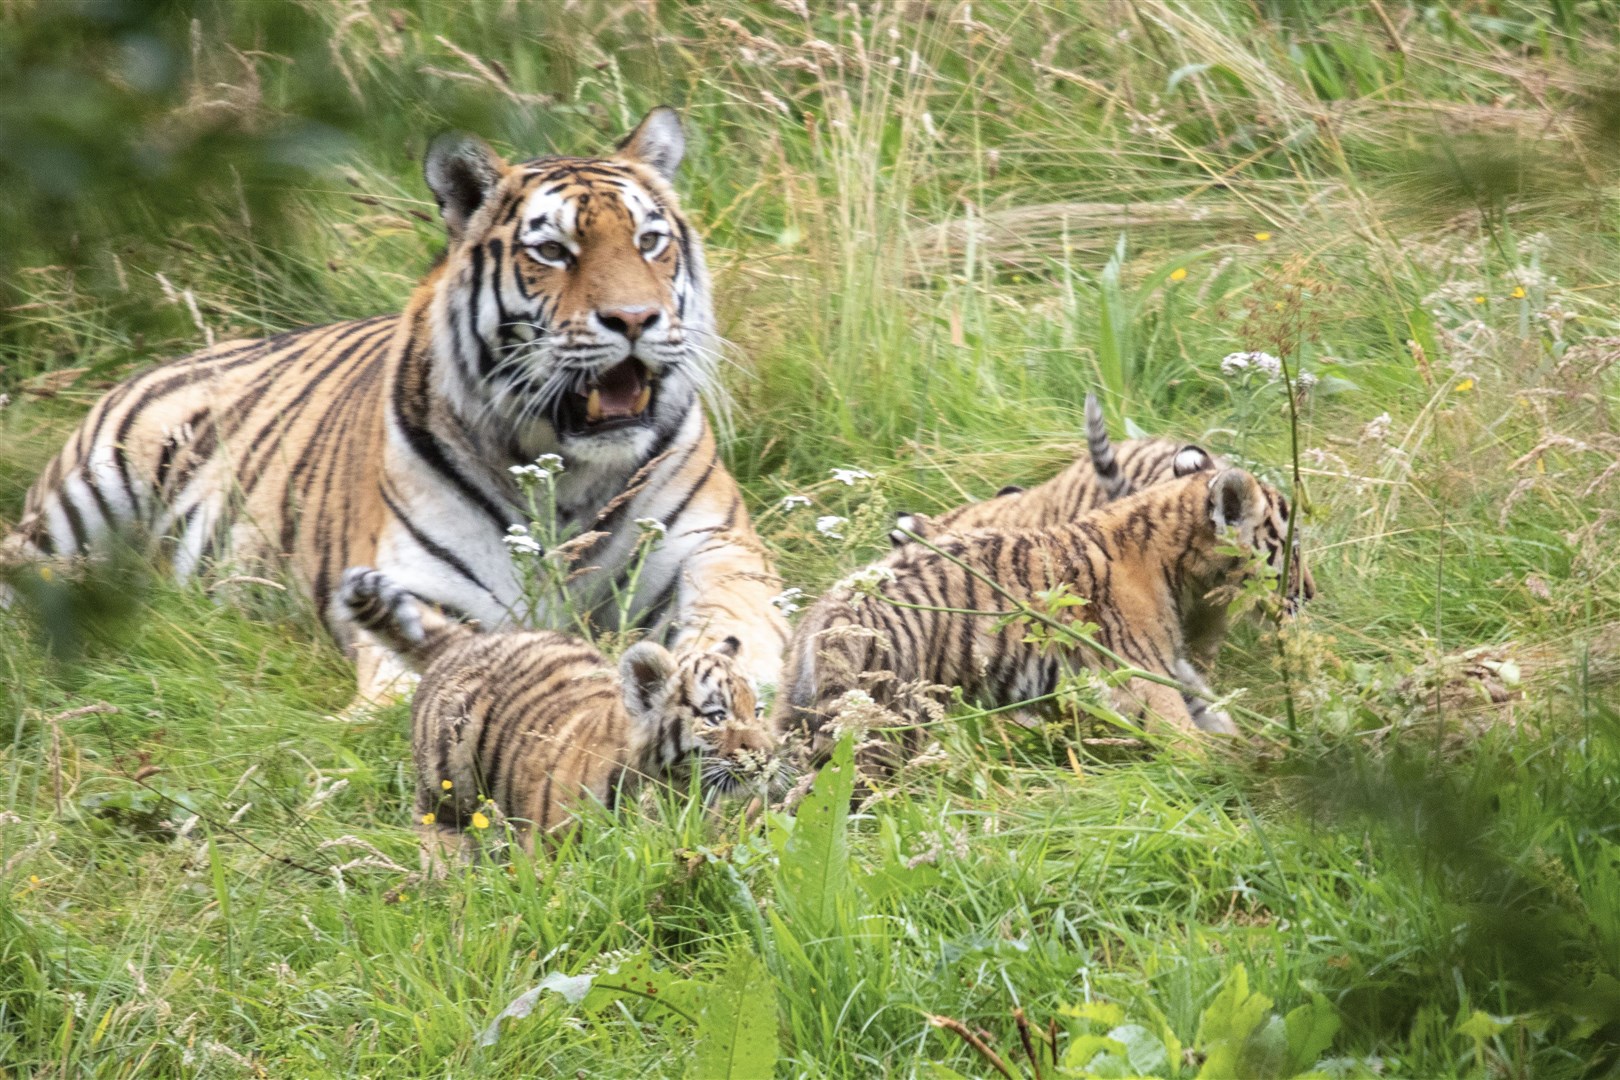 The tiger cubs with mum earlier today at the Highland Wildlife Park. Photo: Aidan Woods